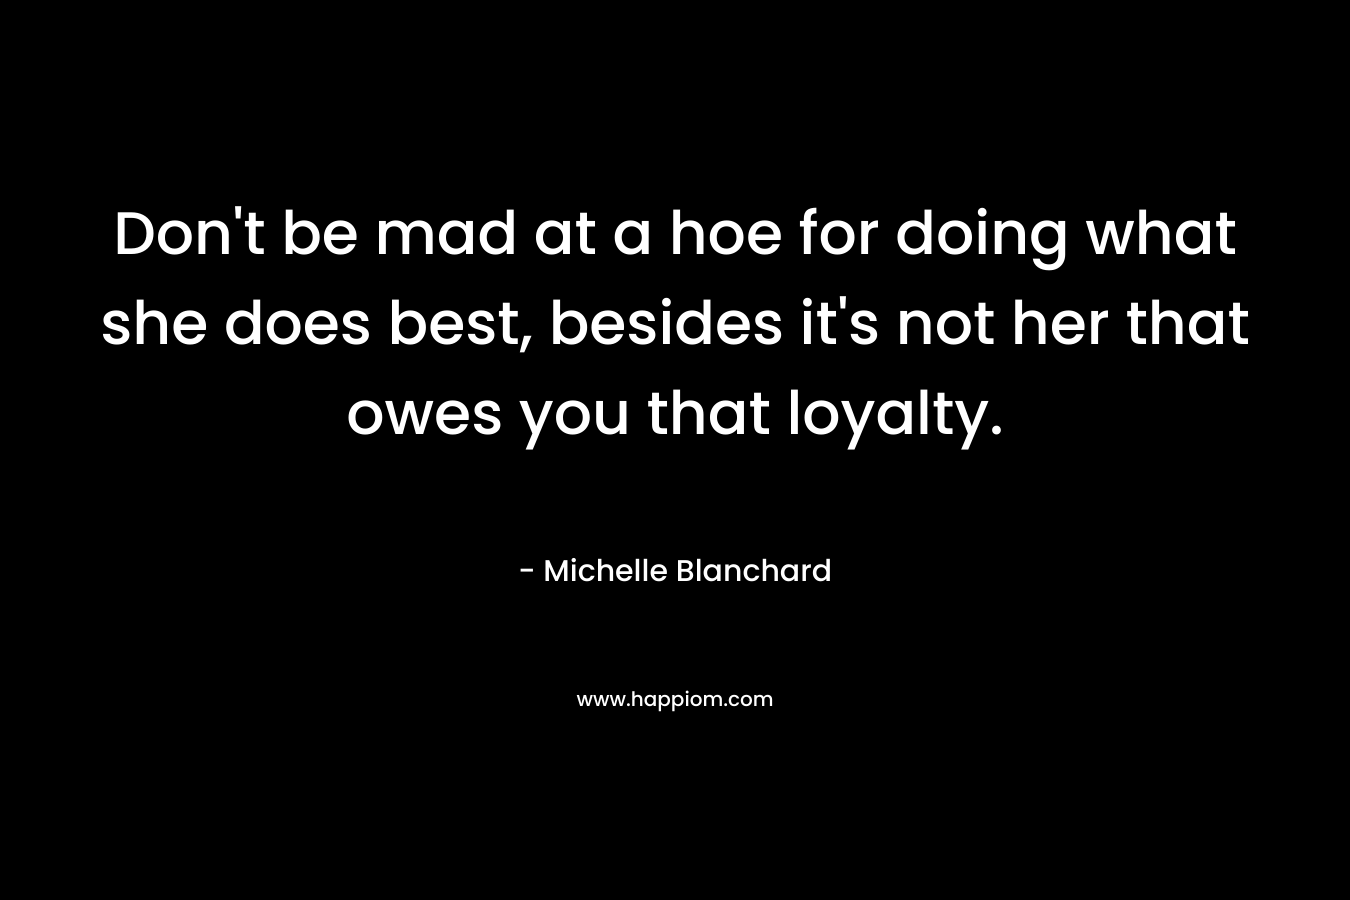 Don’t be mad at a hoe for doing what she does best, besides it’s not her that owes you that loyalty. – Michelle Blanchard